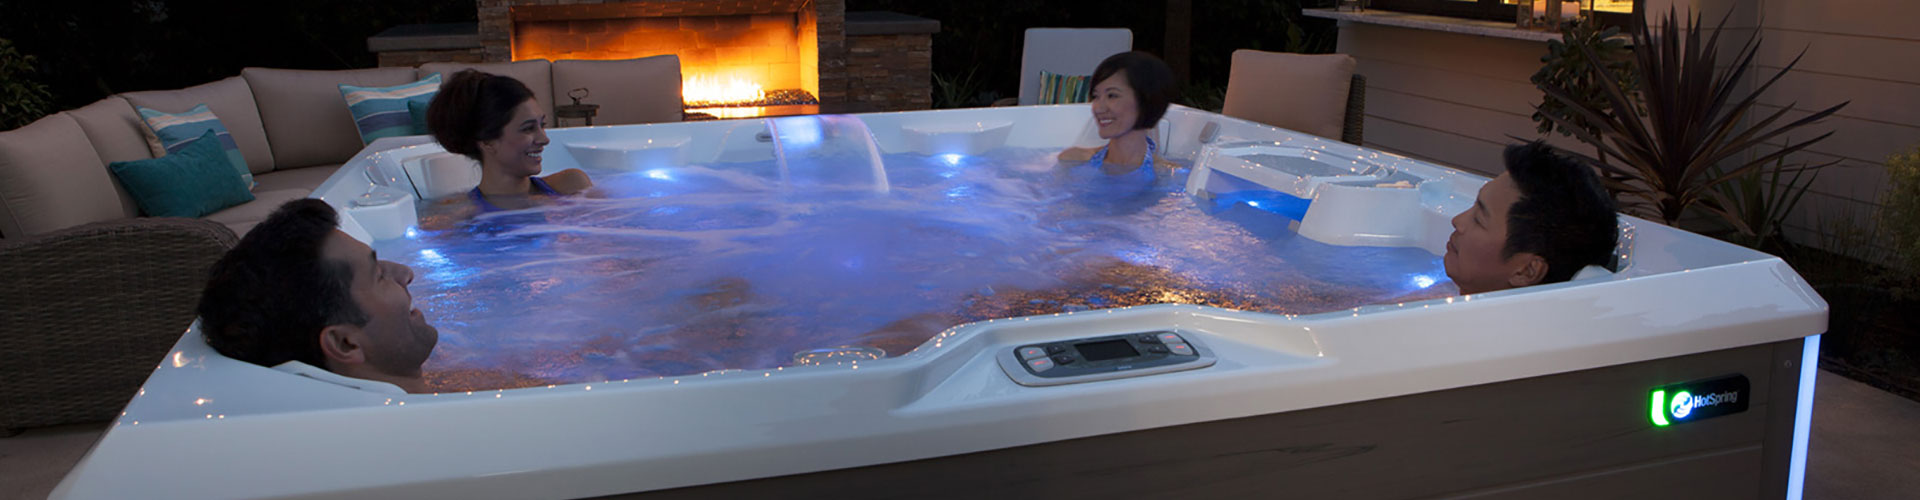 Hot Tub Jet Orgasm Screaming And Moaning Orgasm With Jacuzzi Jet Mobile